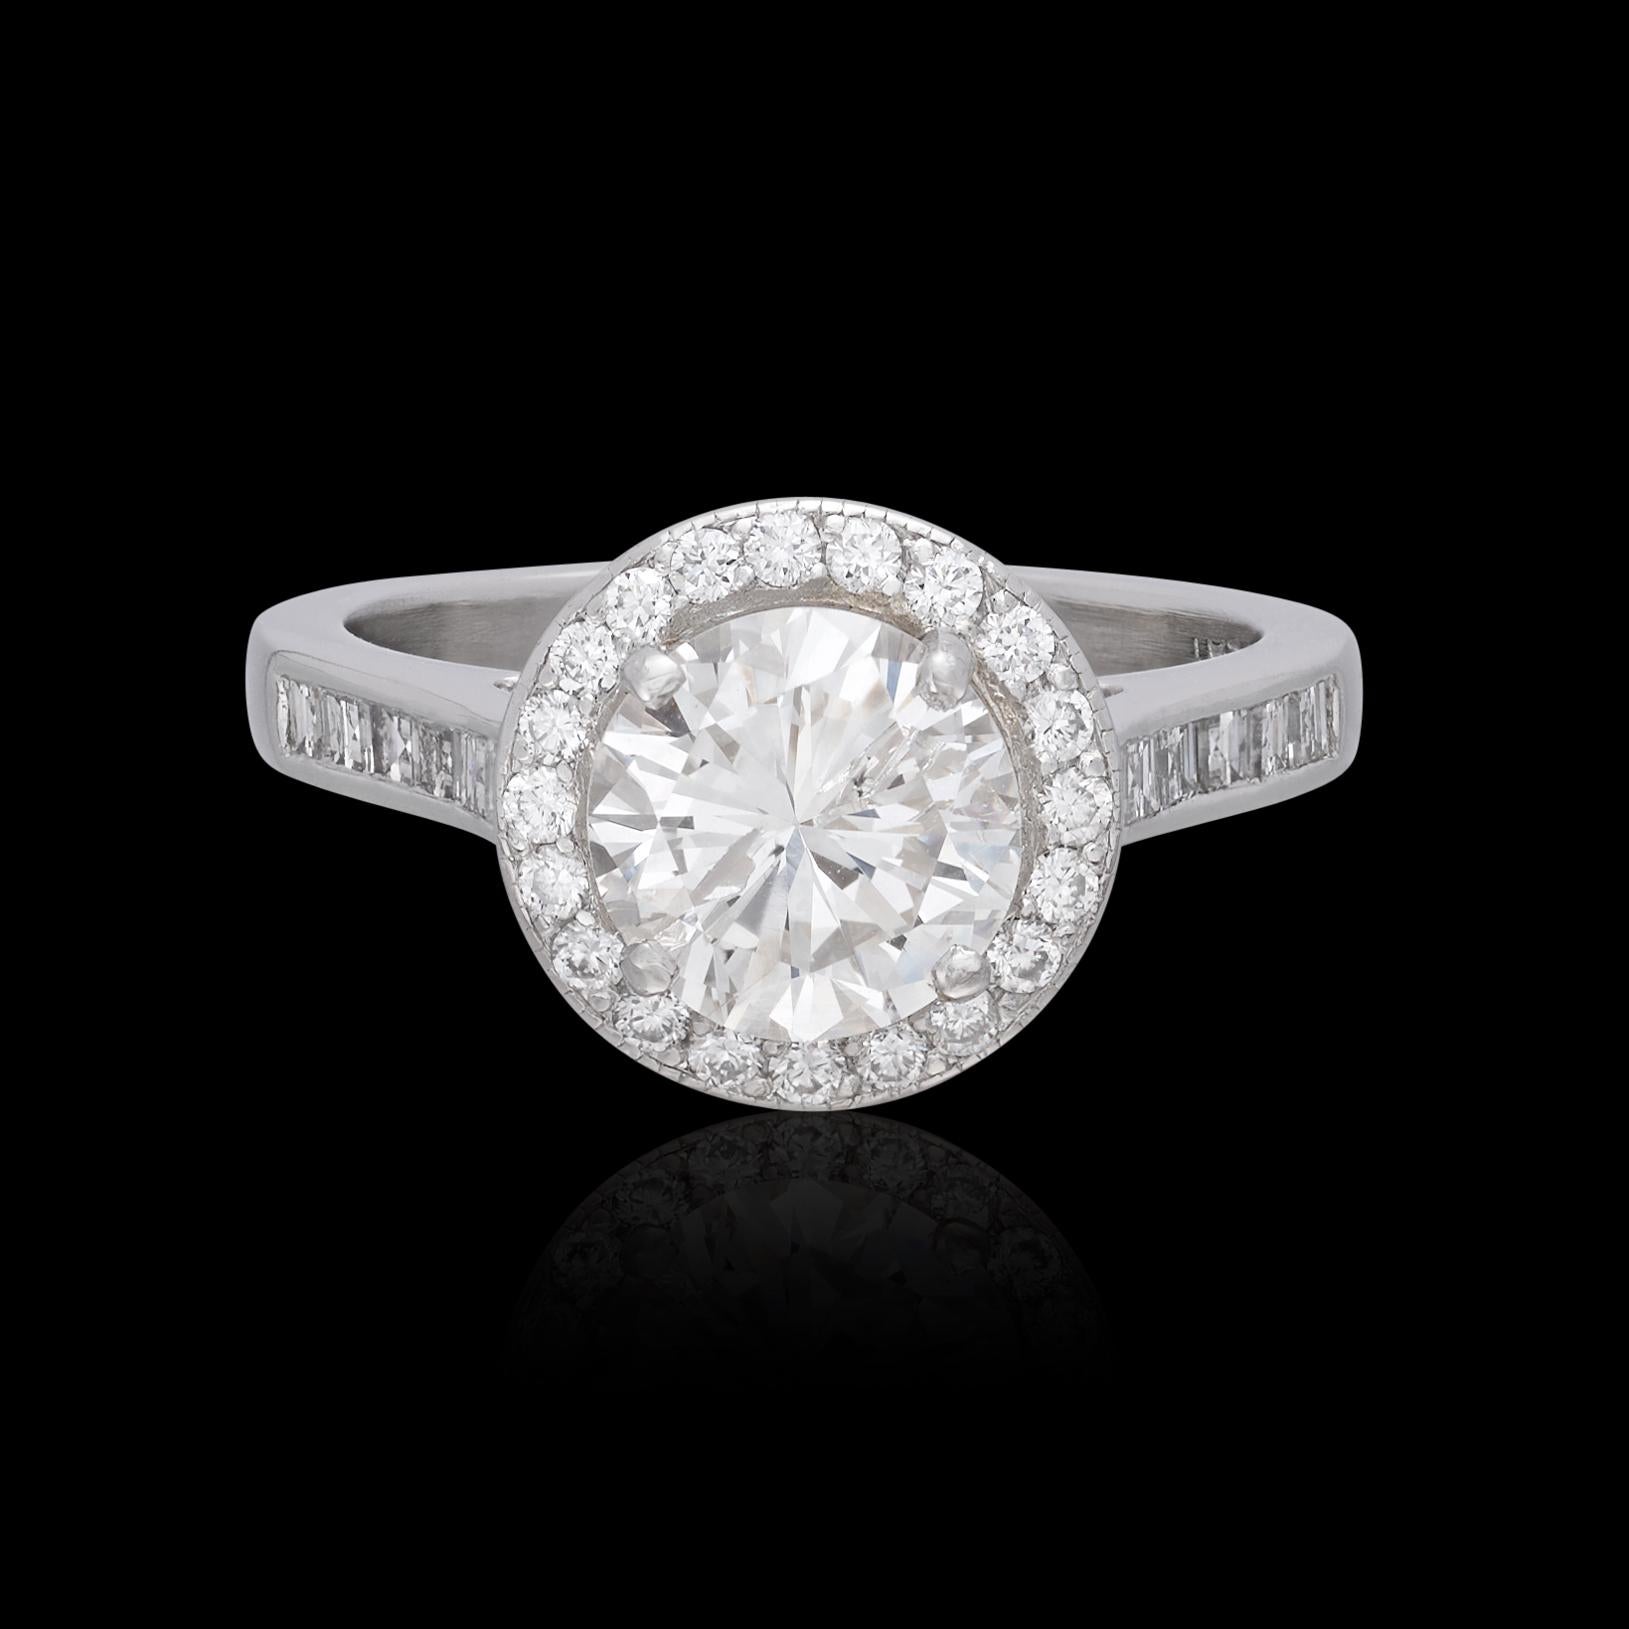 Brilliance and bold design both in this stunner of a ring. Featuring a prong-set round brilliant-cut diamond weighing 1.79 carats (+/-K/I1), accented with a halo of round brilliant-cut diamonds, square-cut diamond shoulders, and two accent stones,